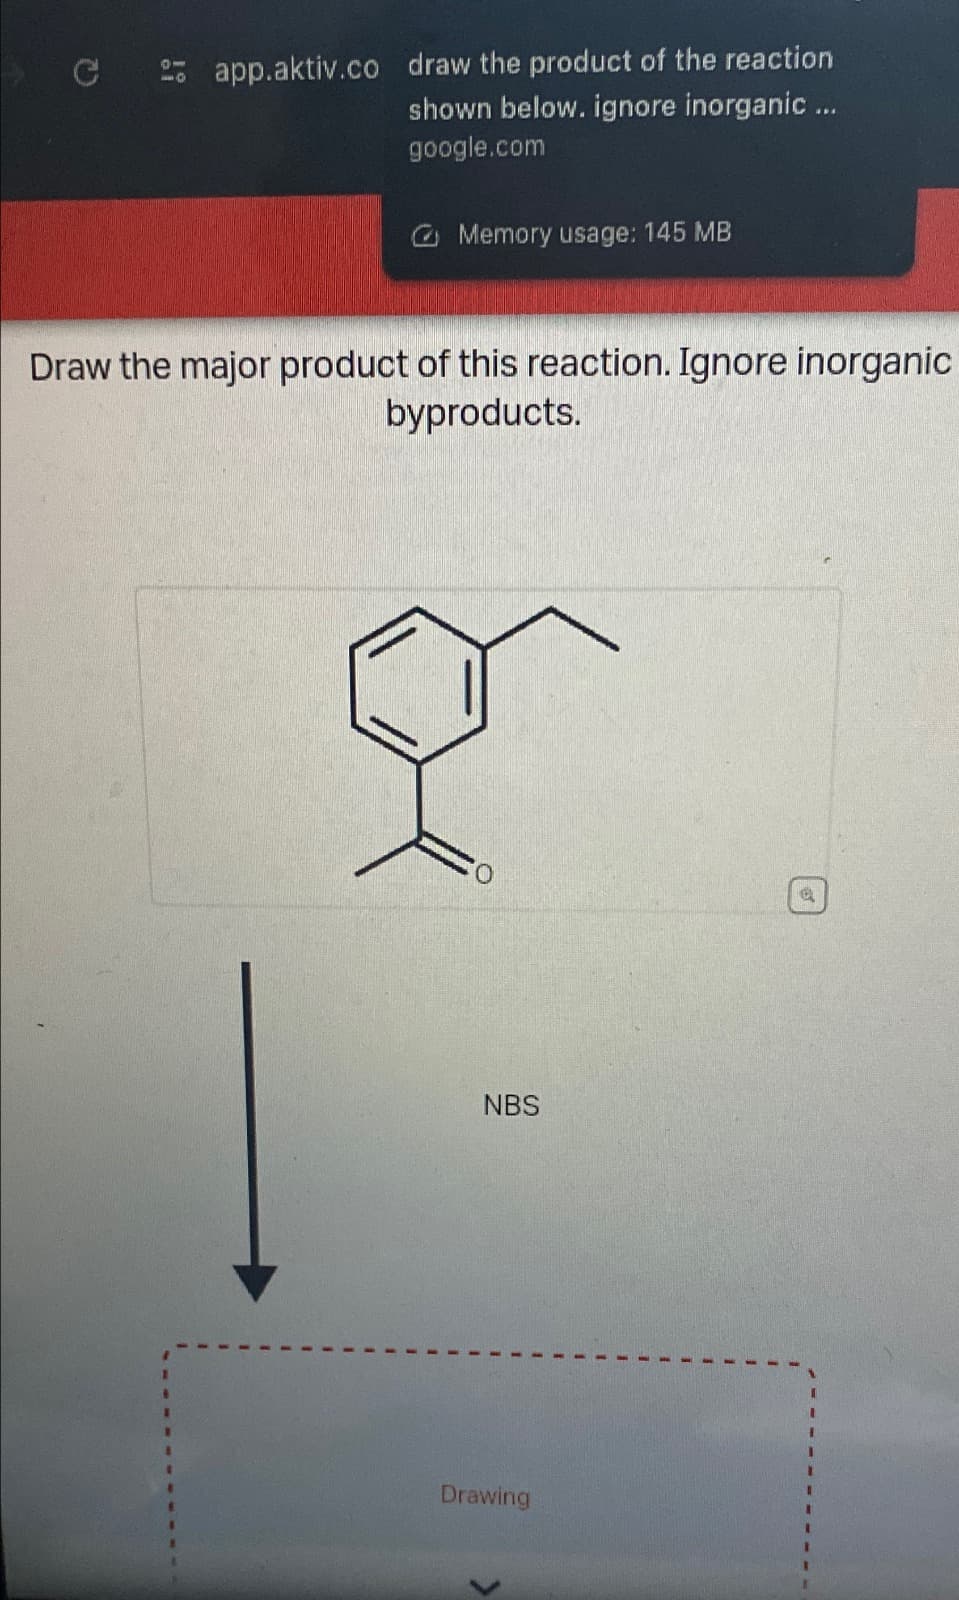 Q
app.aktiv.co draw the product of the reaction
shown below. ignore inorganic ...
google.com
Memory usage: 145 MB
Draw the major product of this reaction. Ignore inorganic
byproducts.
NBS
Drawing
a